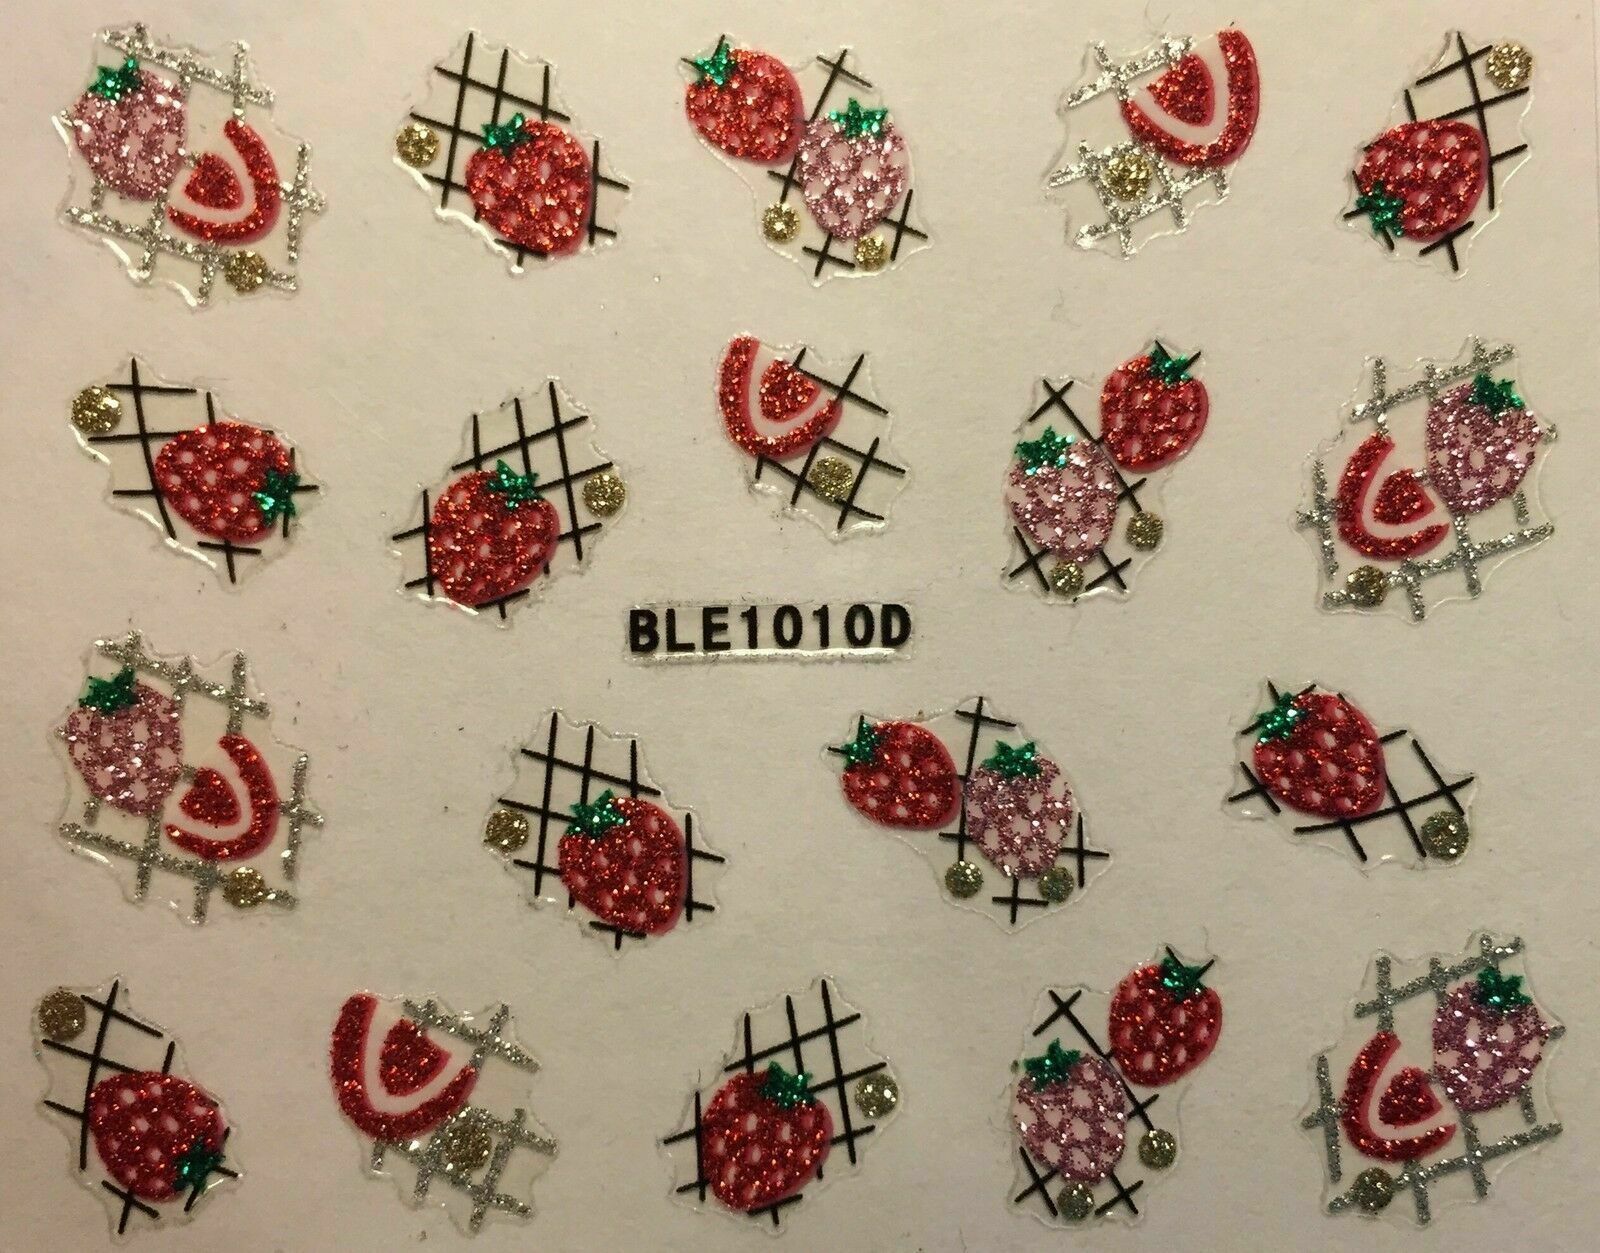 Nail Art 3D Glitter Decal Stickers Strawberries Strawberry Fruit Tips BLE1010D